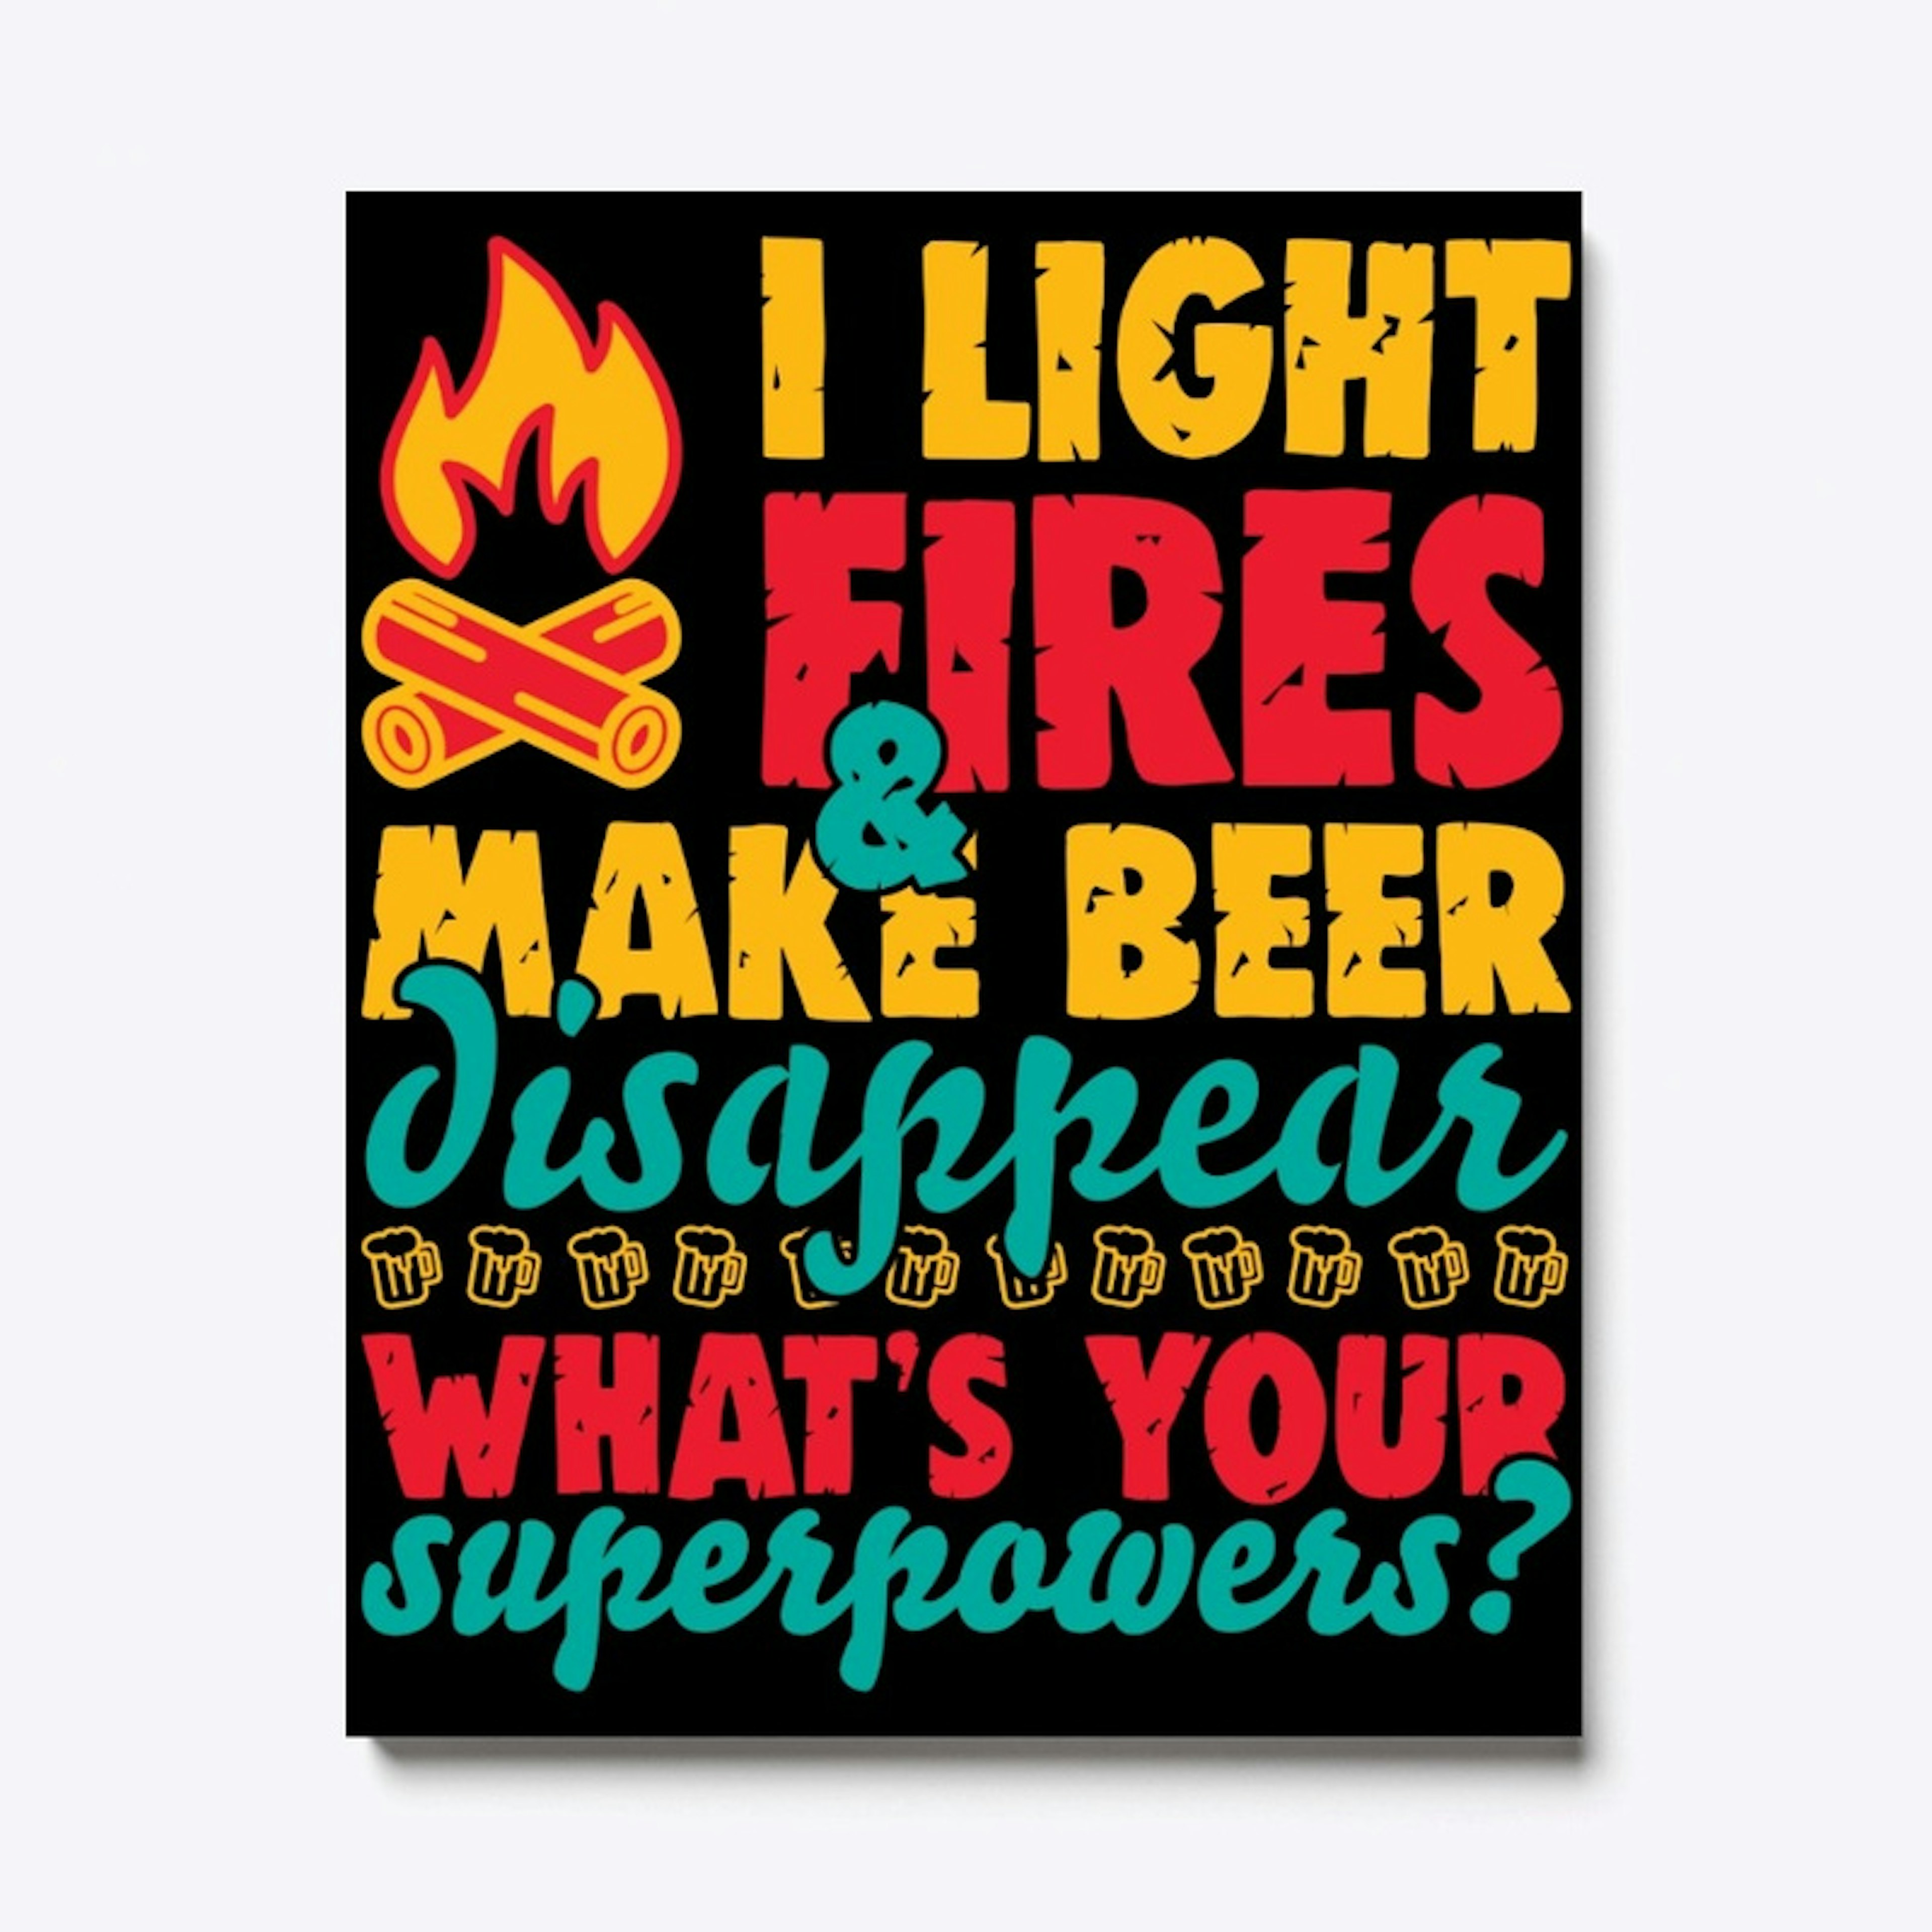 I Light Fires And Make Beer Disappear